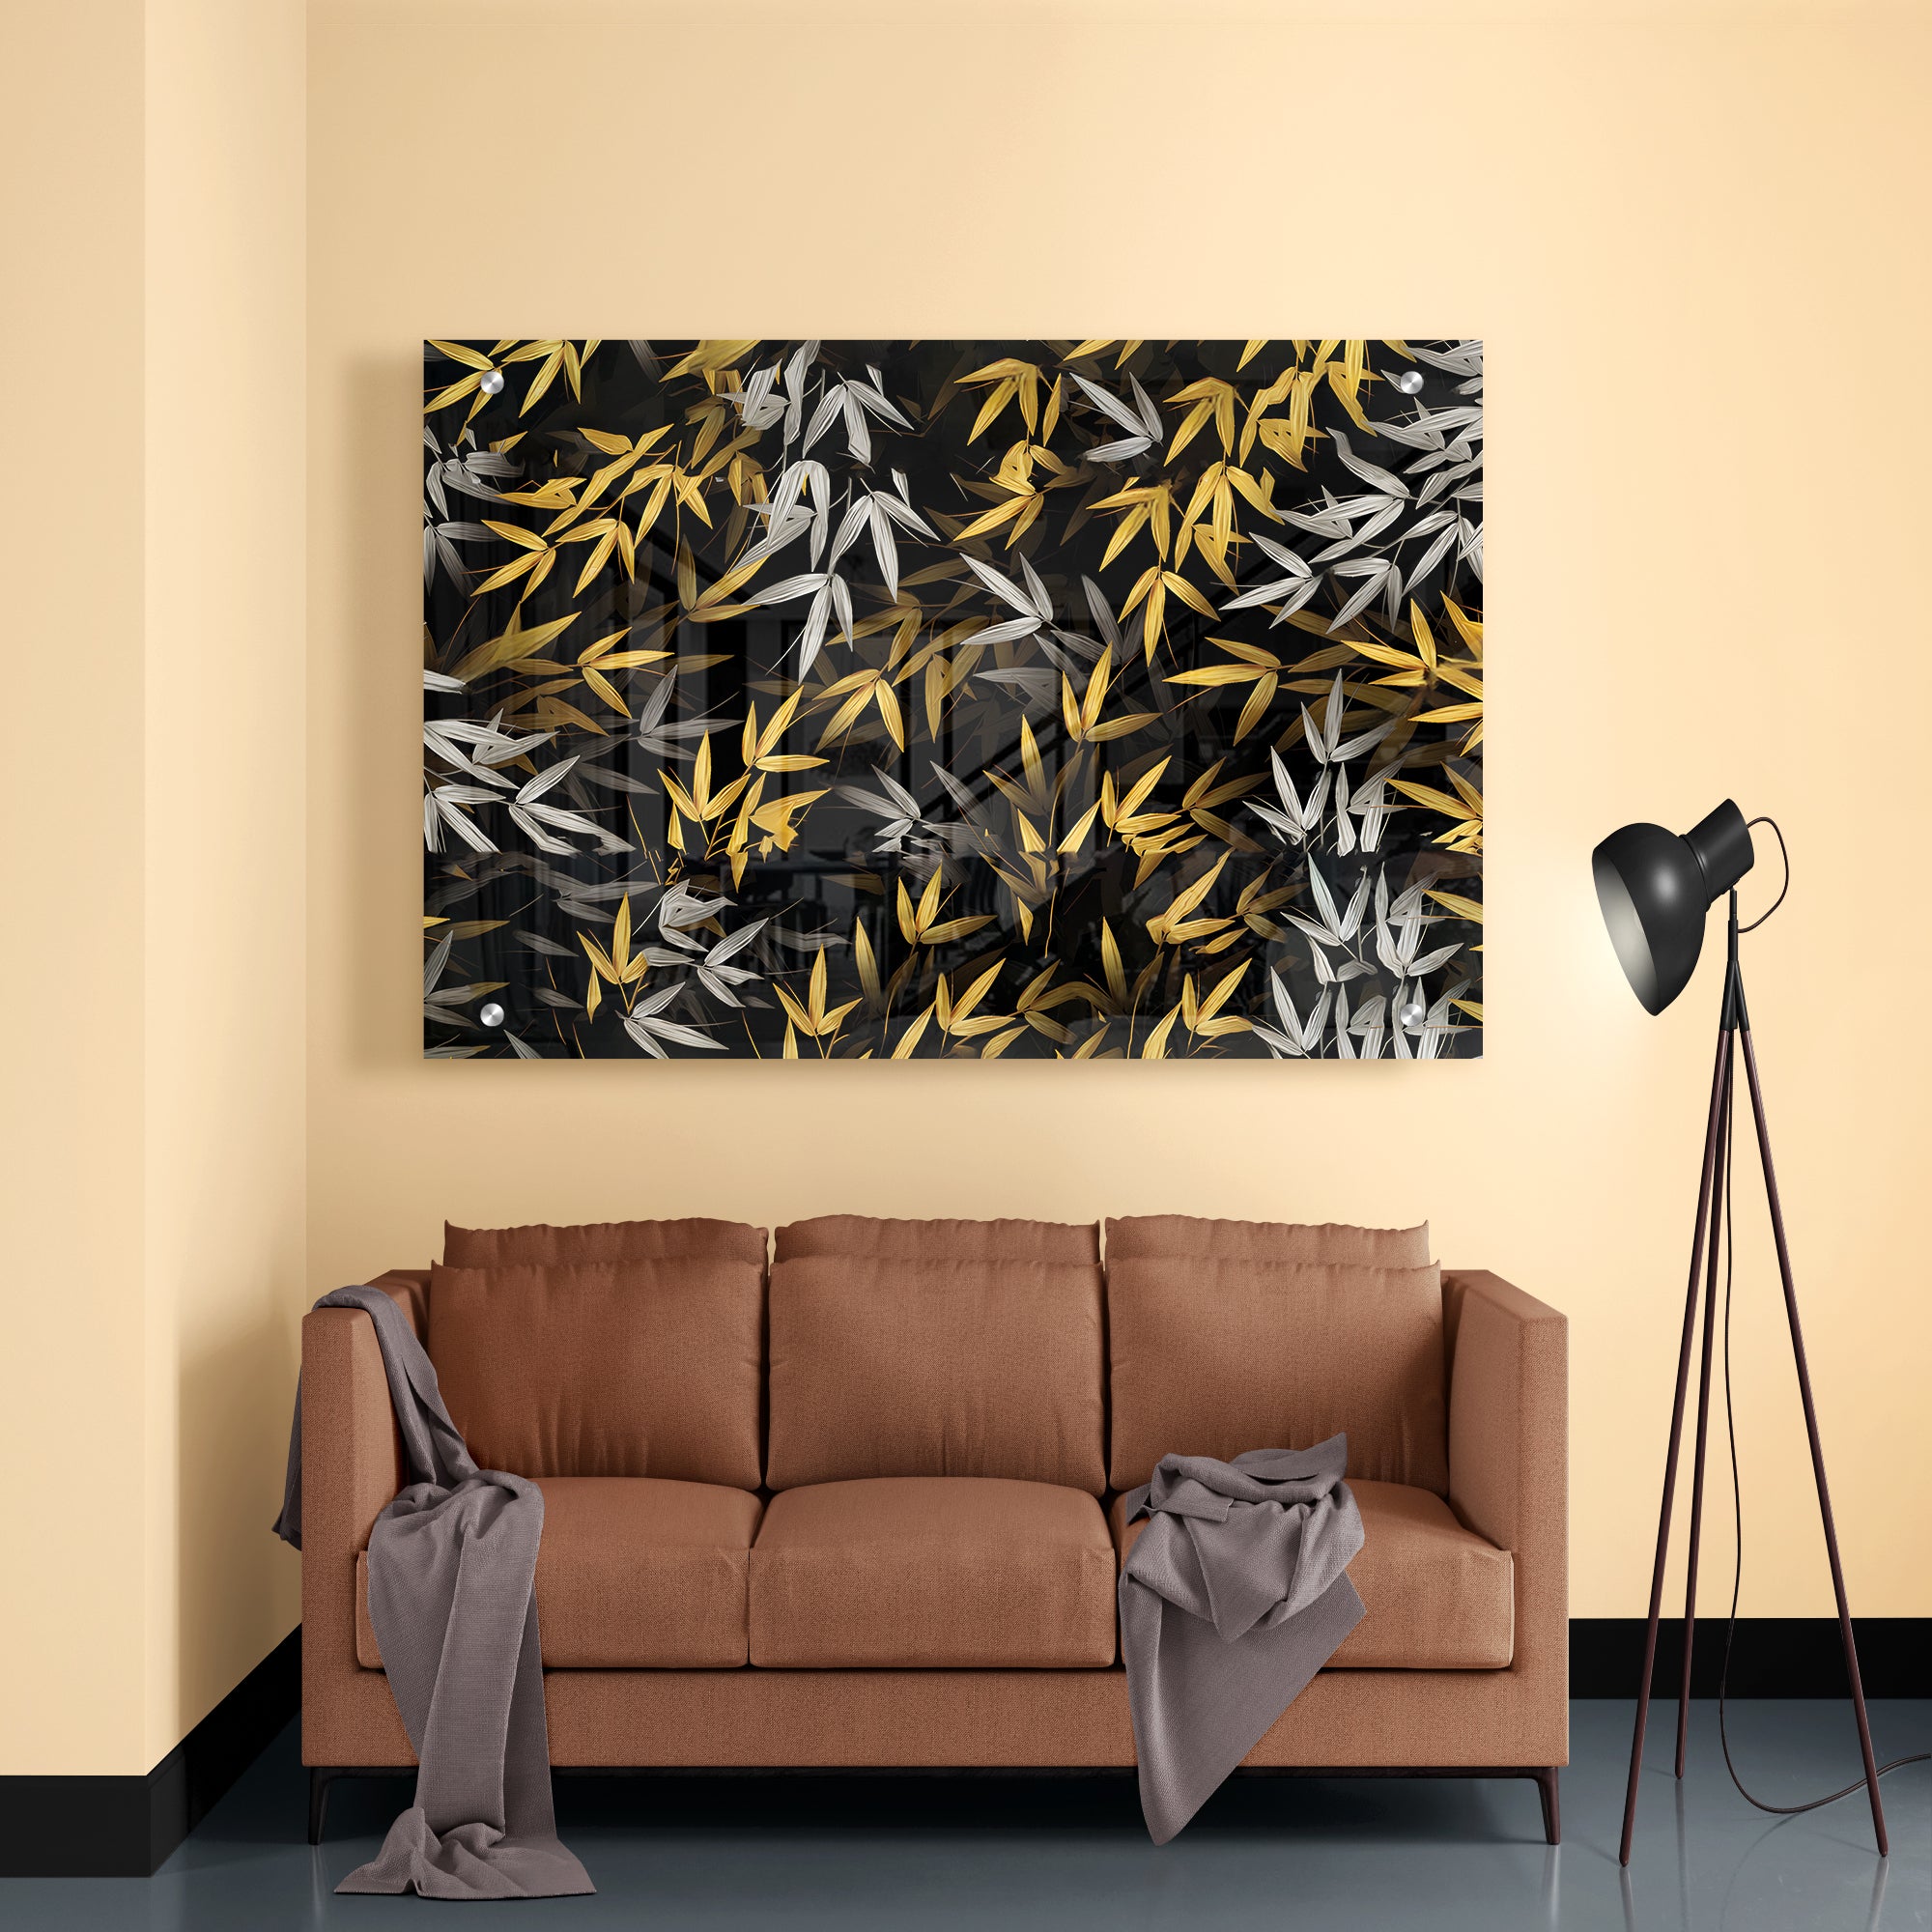 Golden Bamboo Leaves Morden Art Acrylic Painting